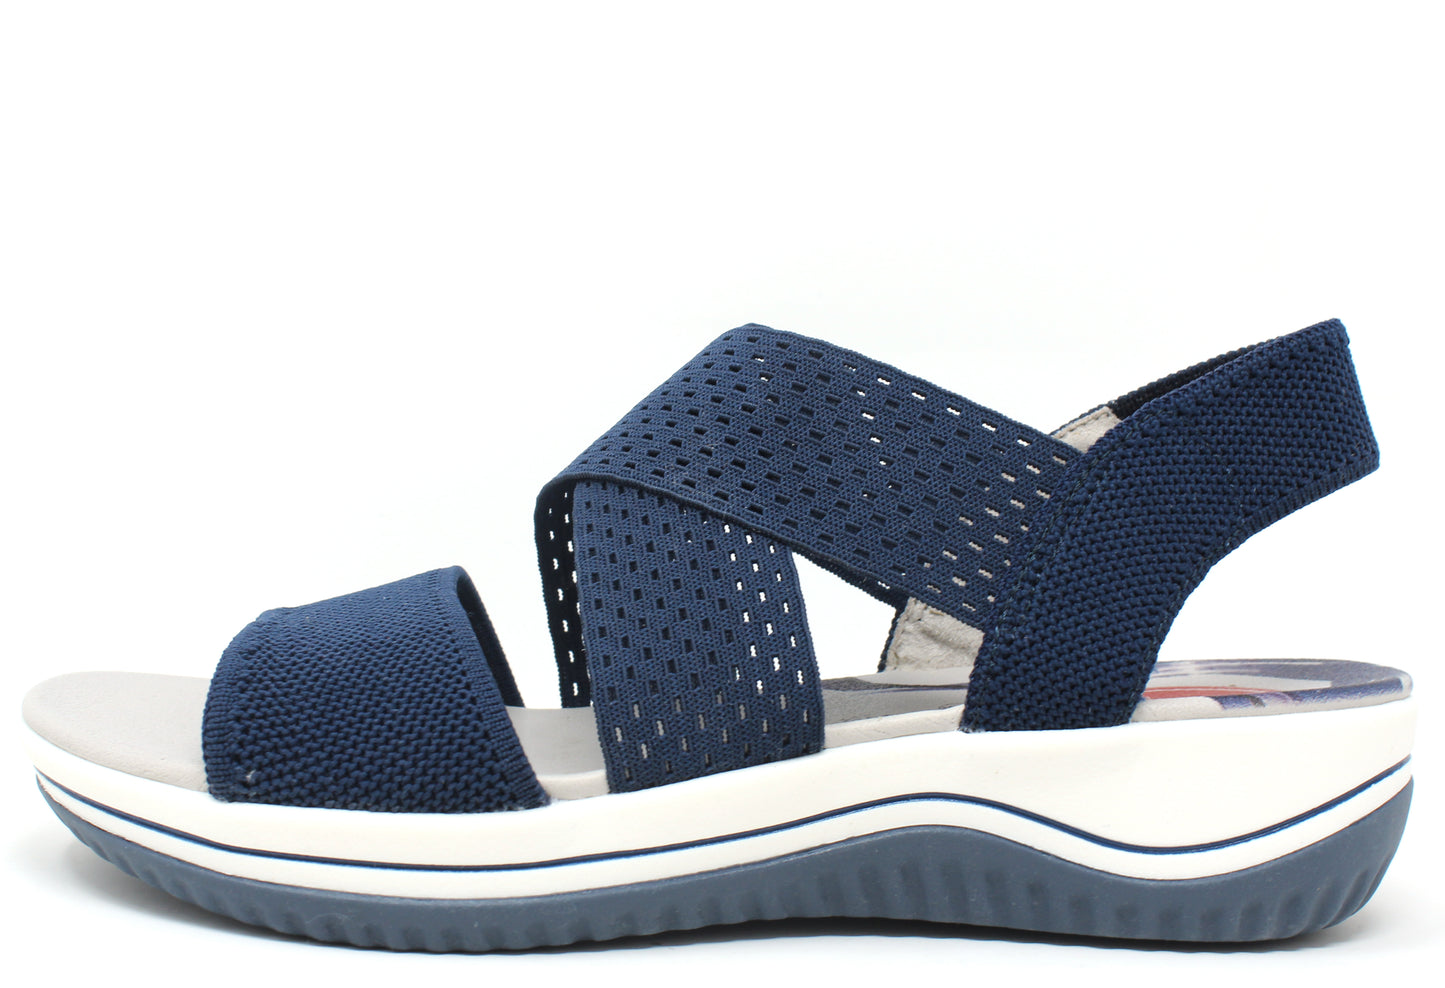 Relaxed Fit Elasticated Strap Sandal